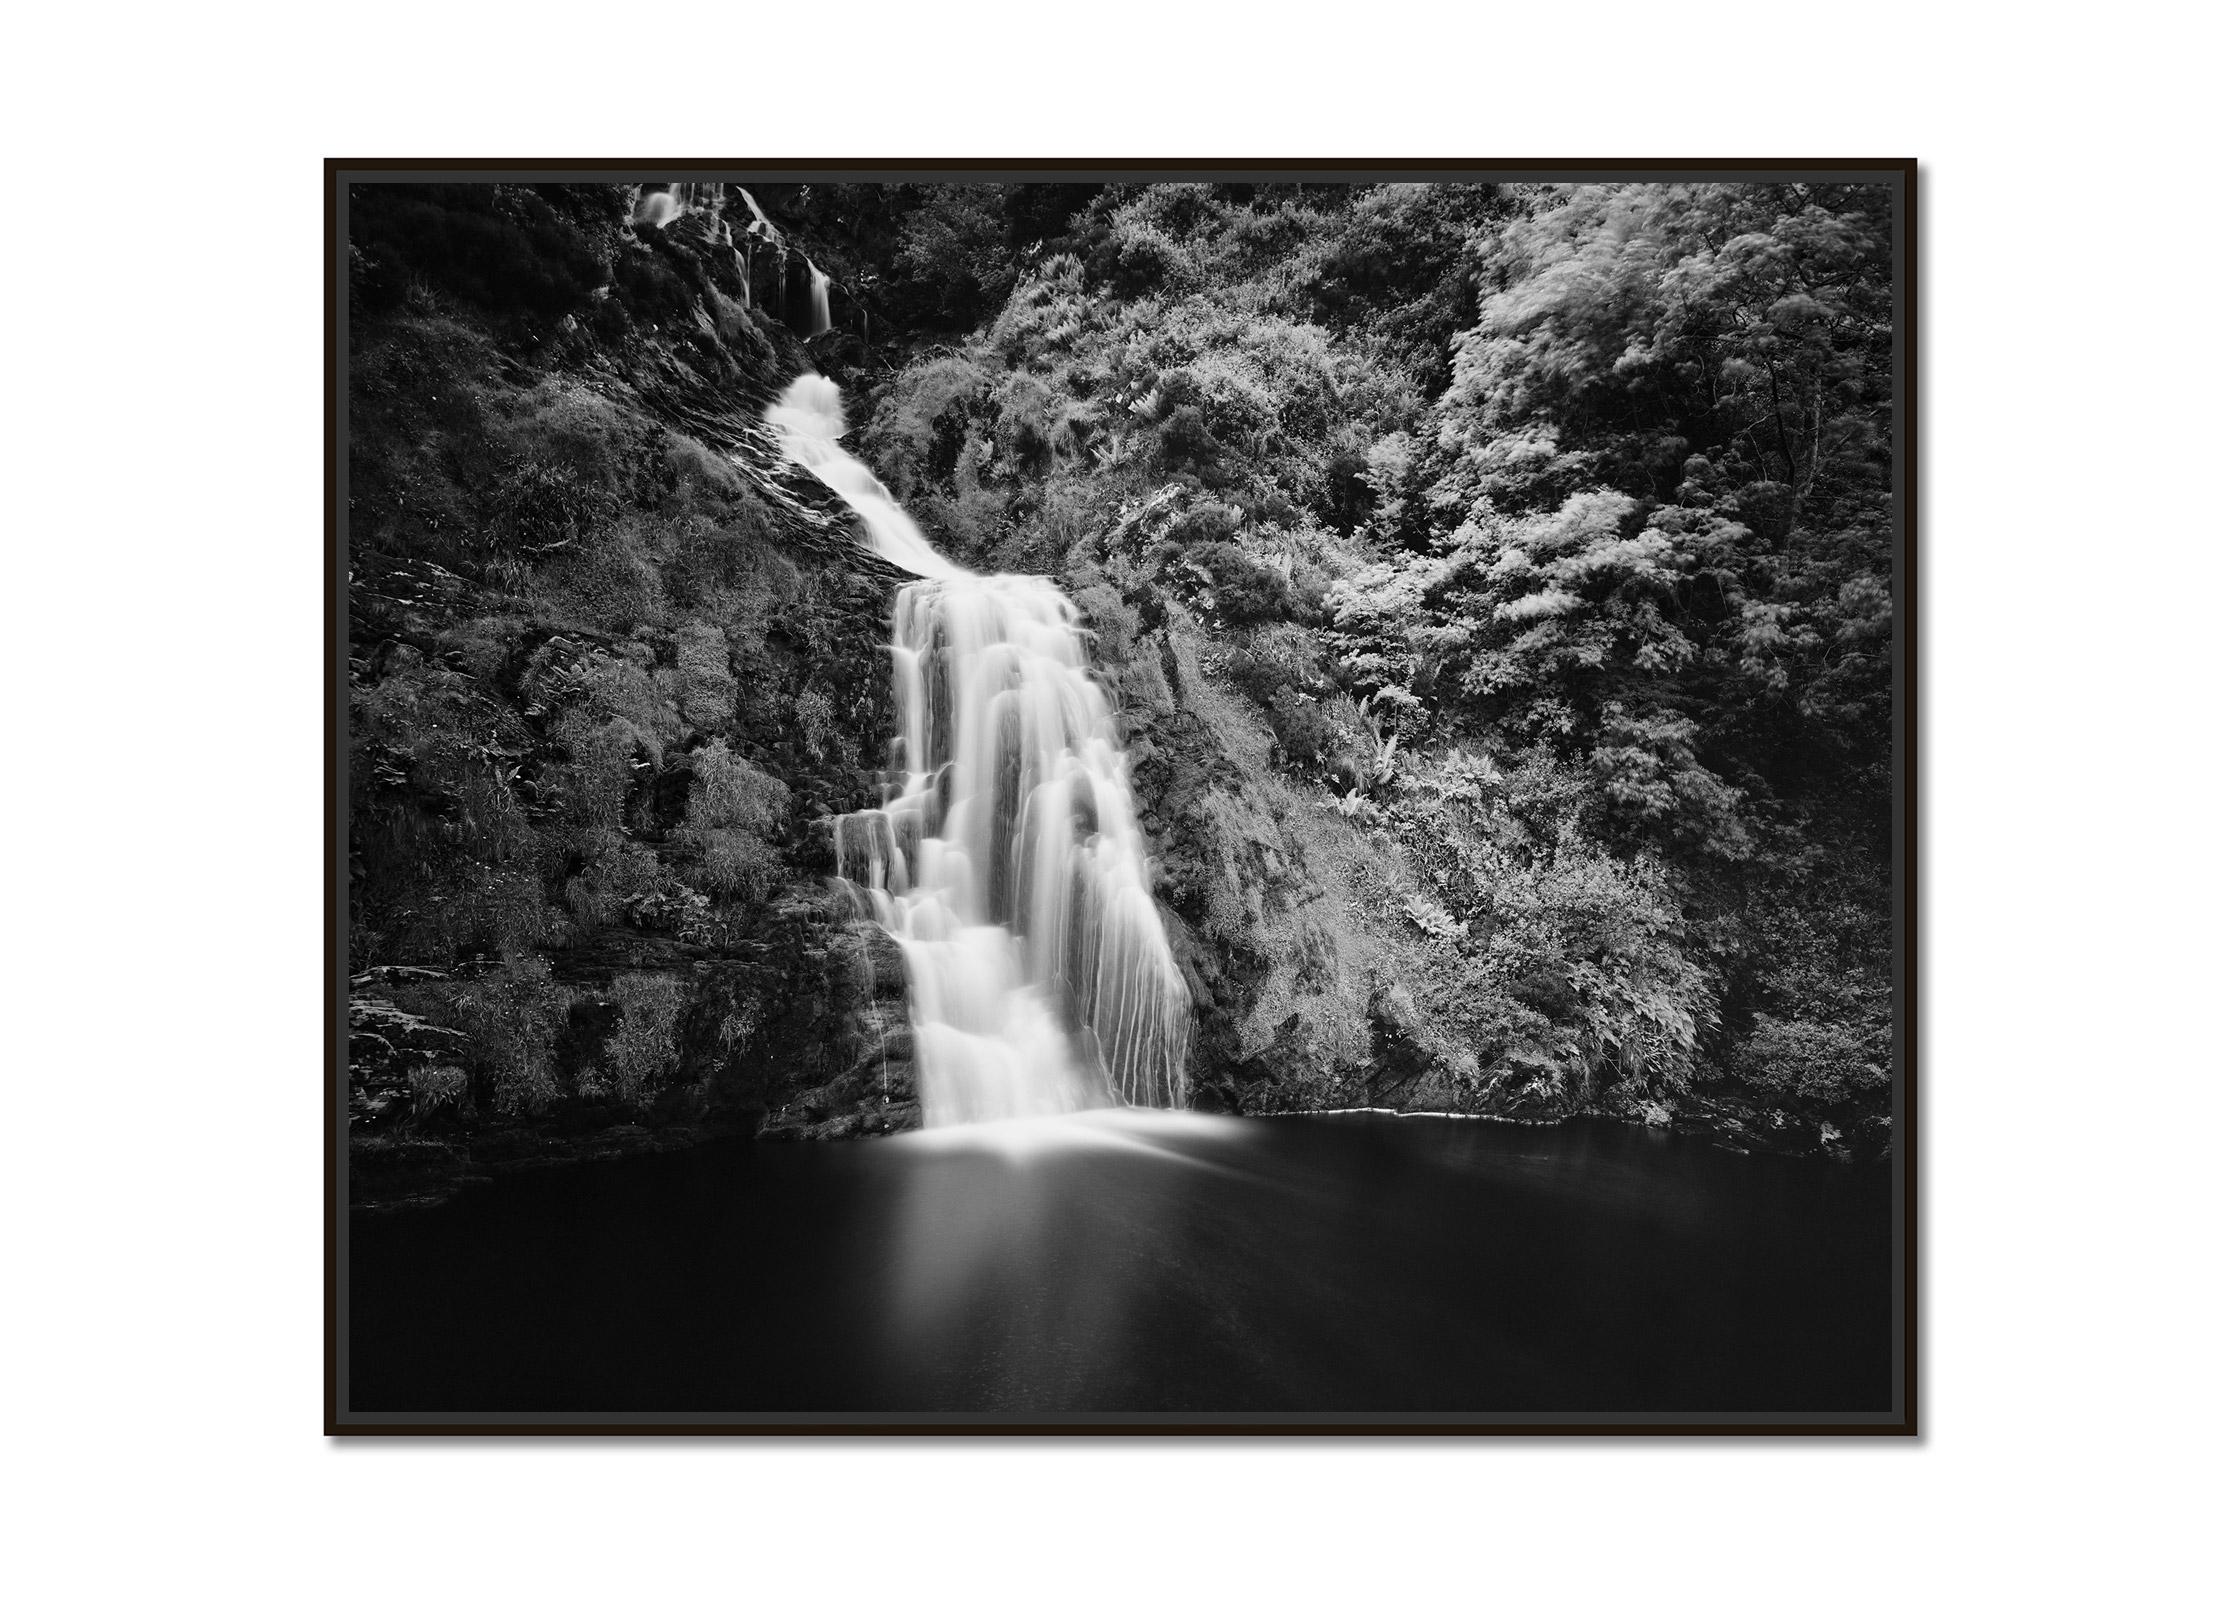 Waterfall, Ireland, black and white art photography, waterscape, long exposure  - Photograph by Gerald Berghammer